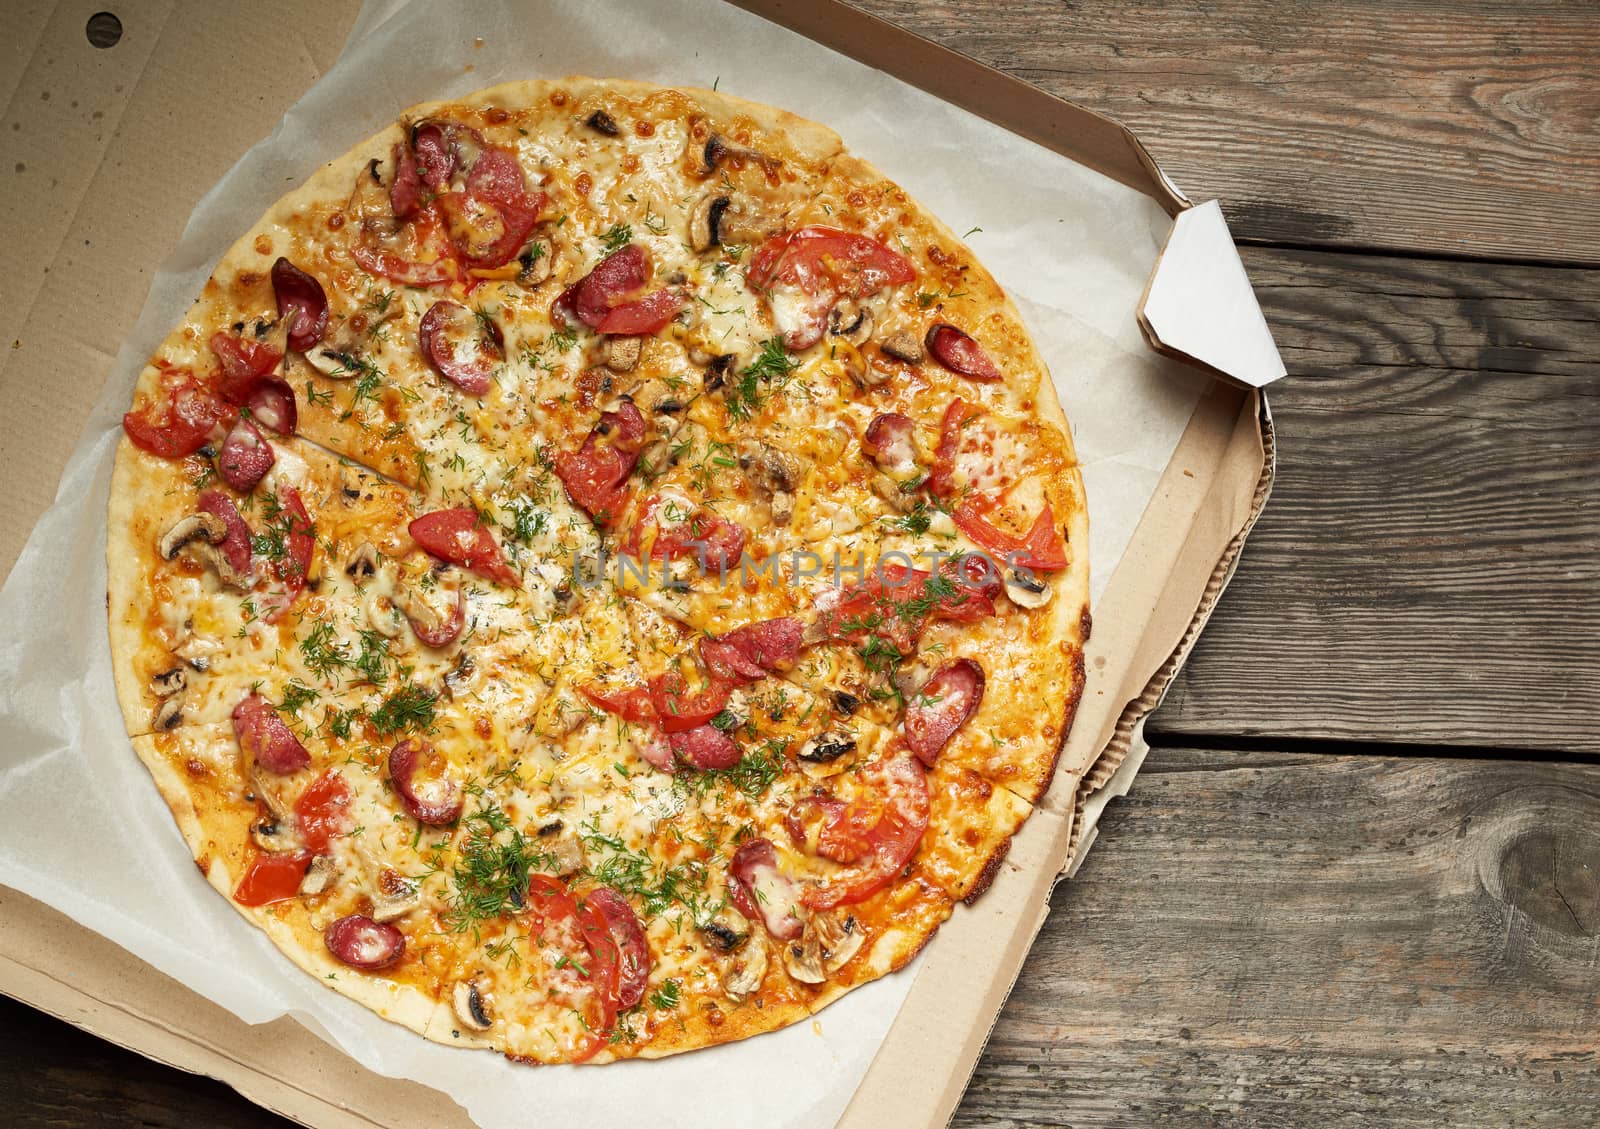 baked round pizza with smoked sausages, mushrooms, tomatoes by ndanko